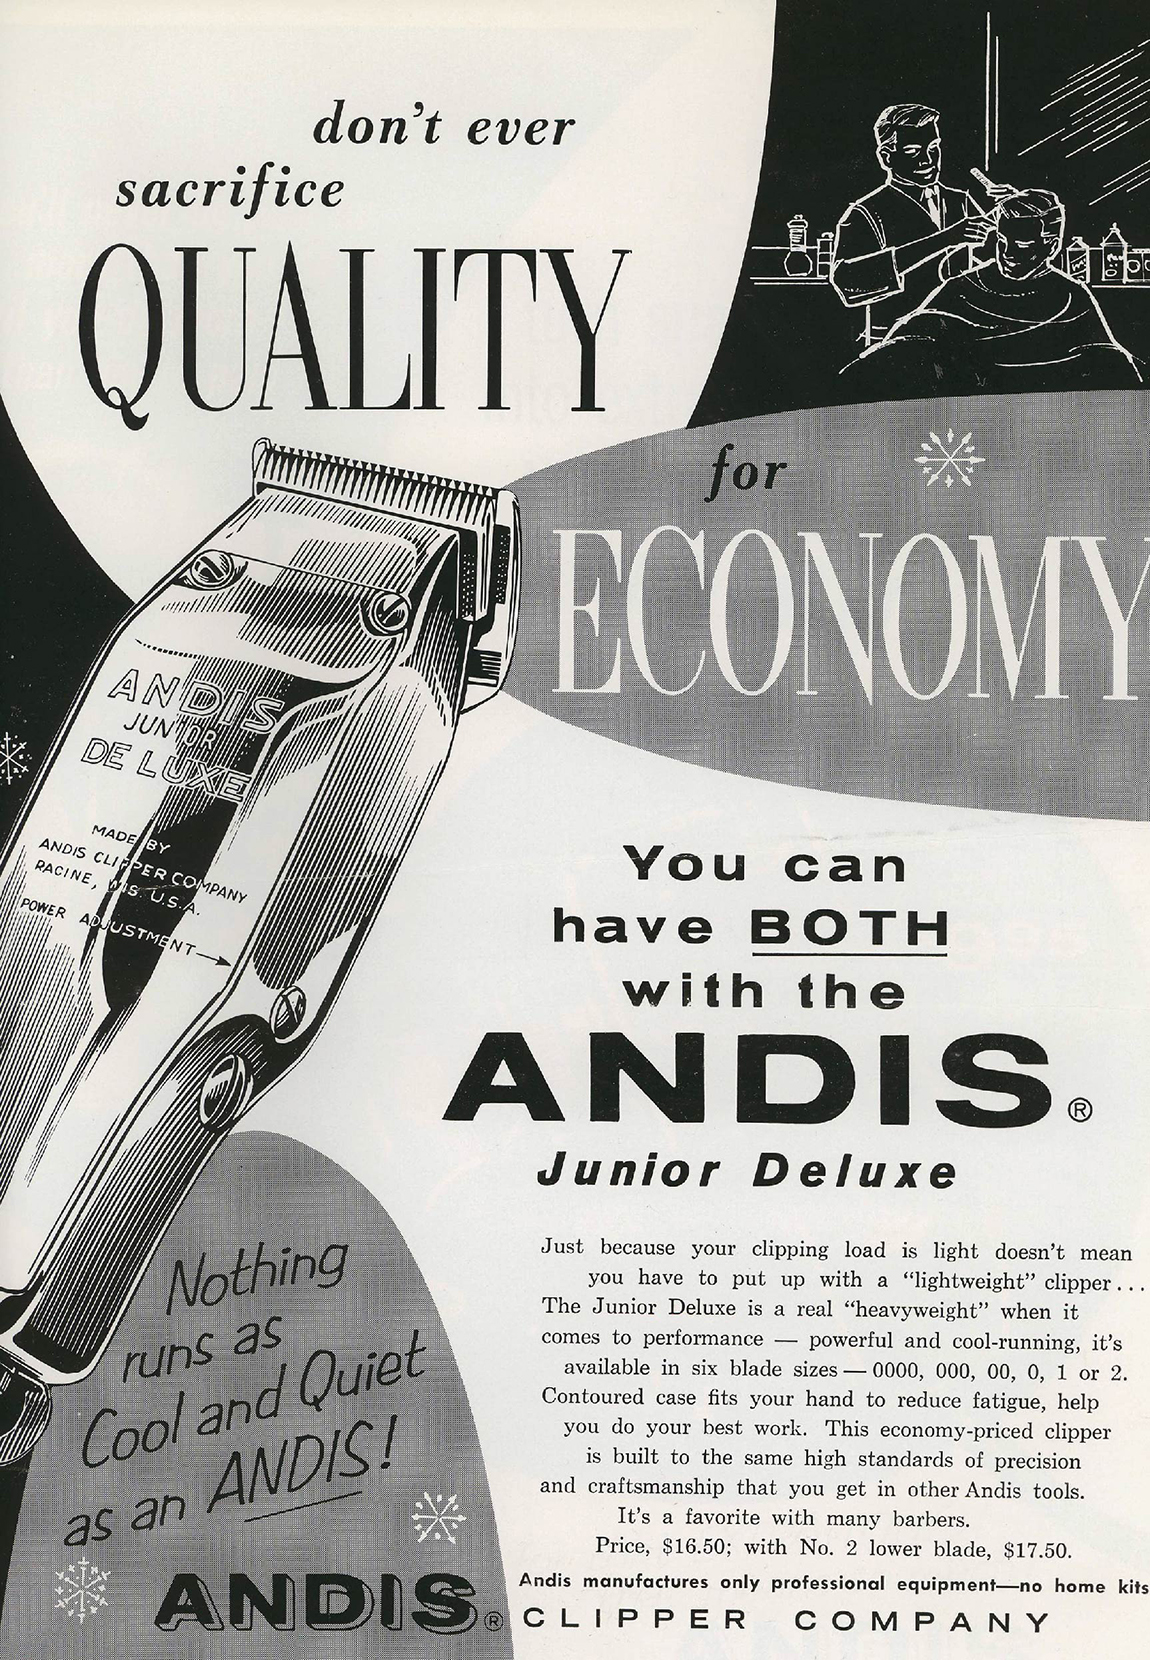 Andis Clipper quality ad